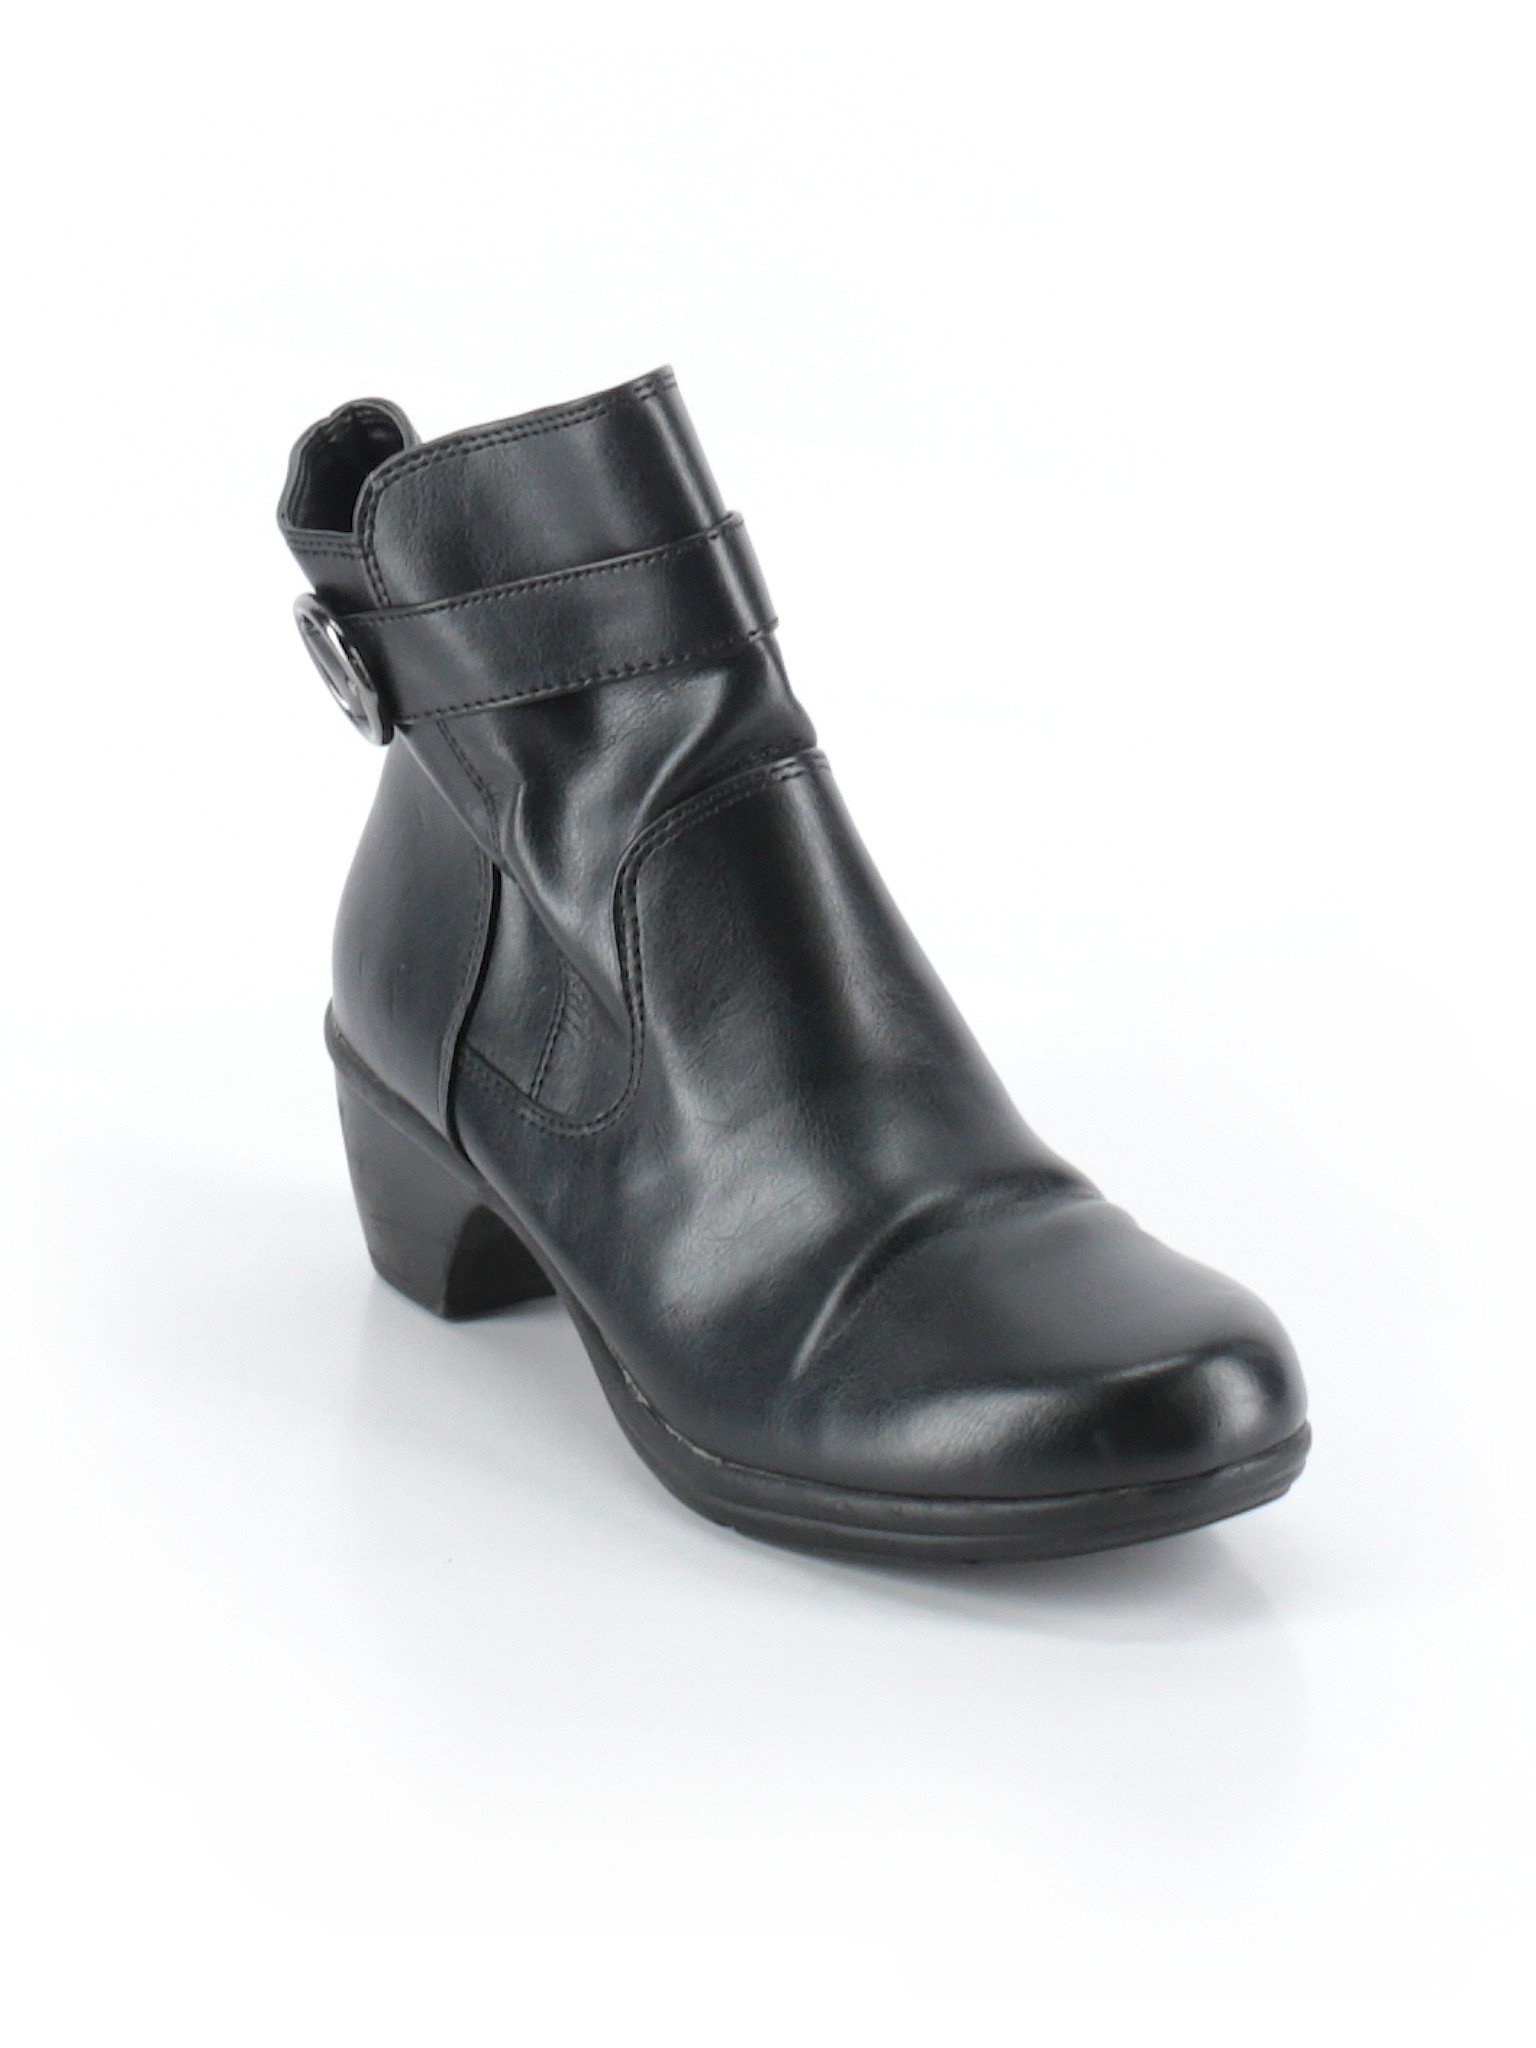 comfort plus by predictions ankle boots